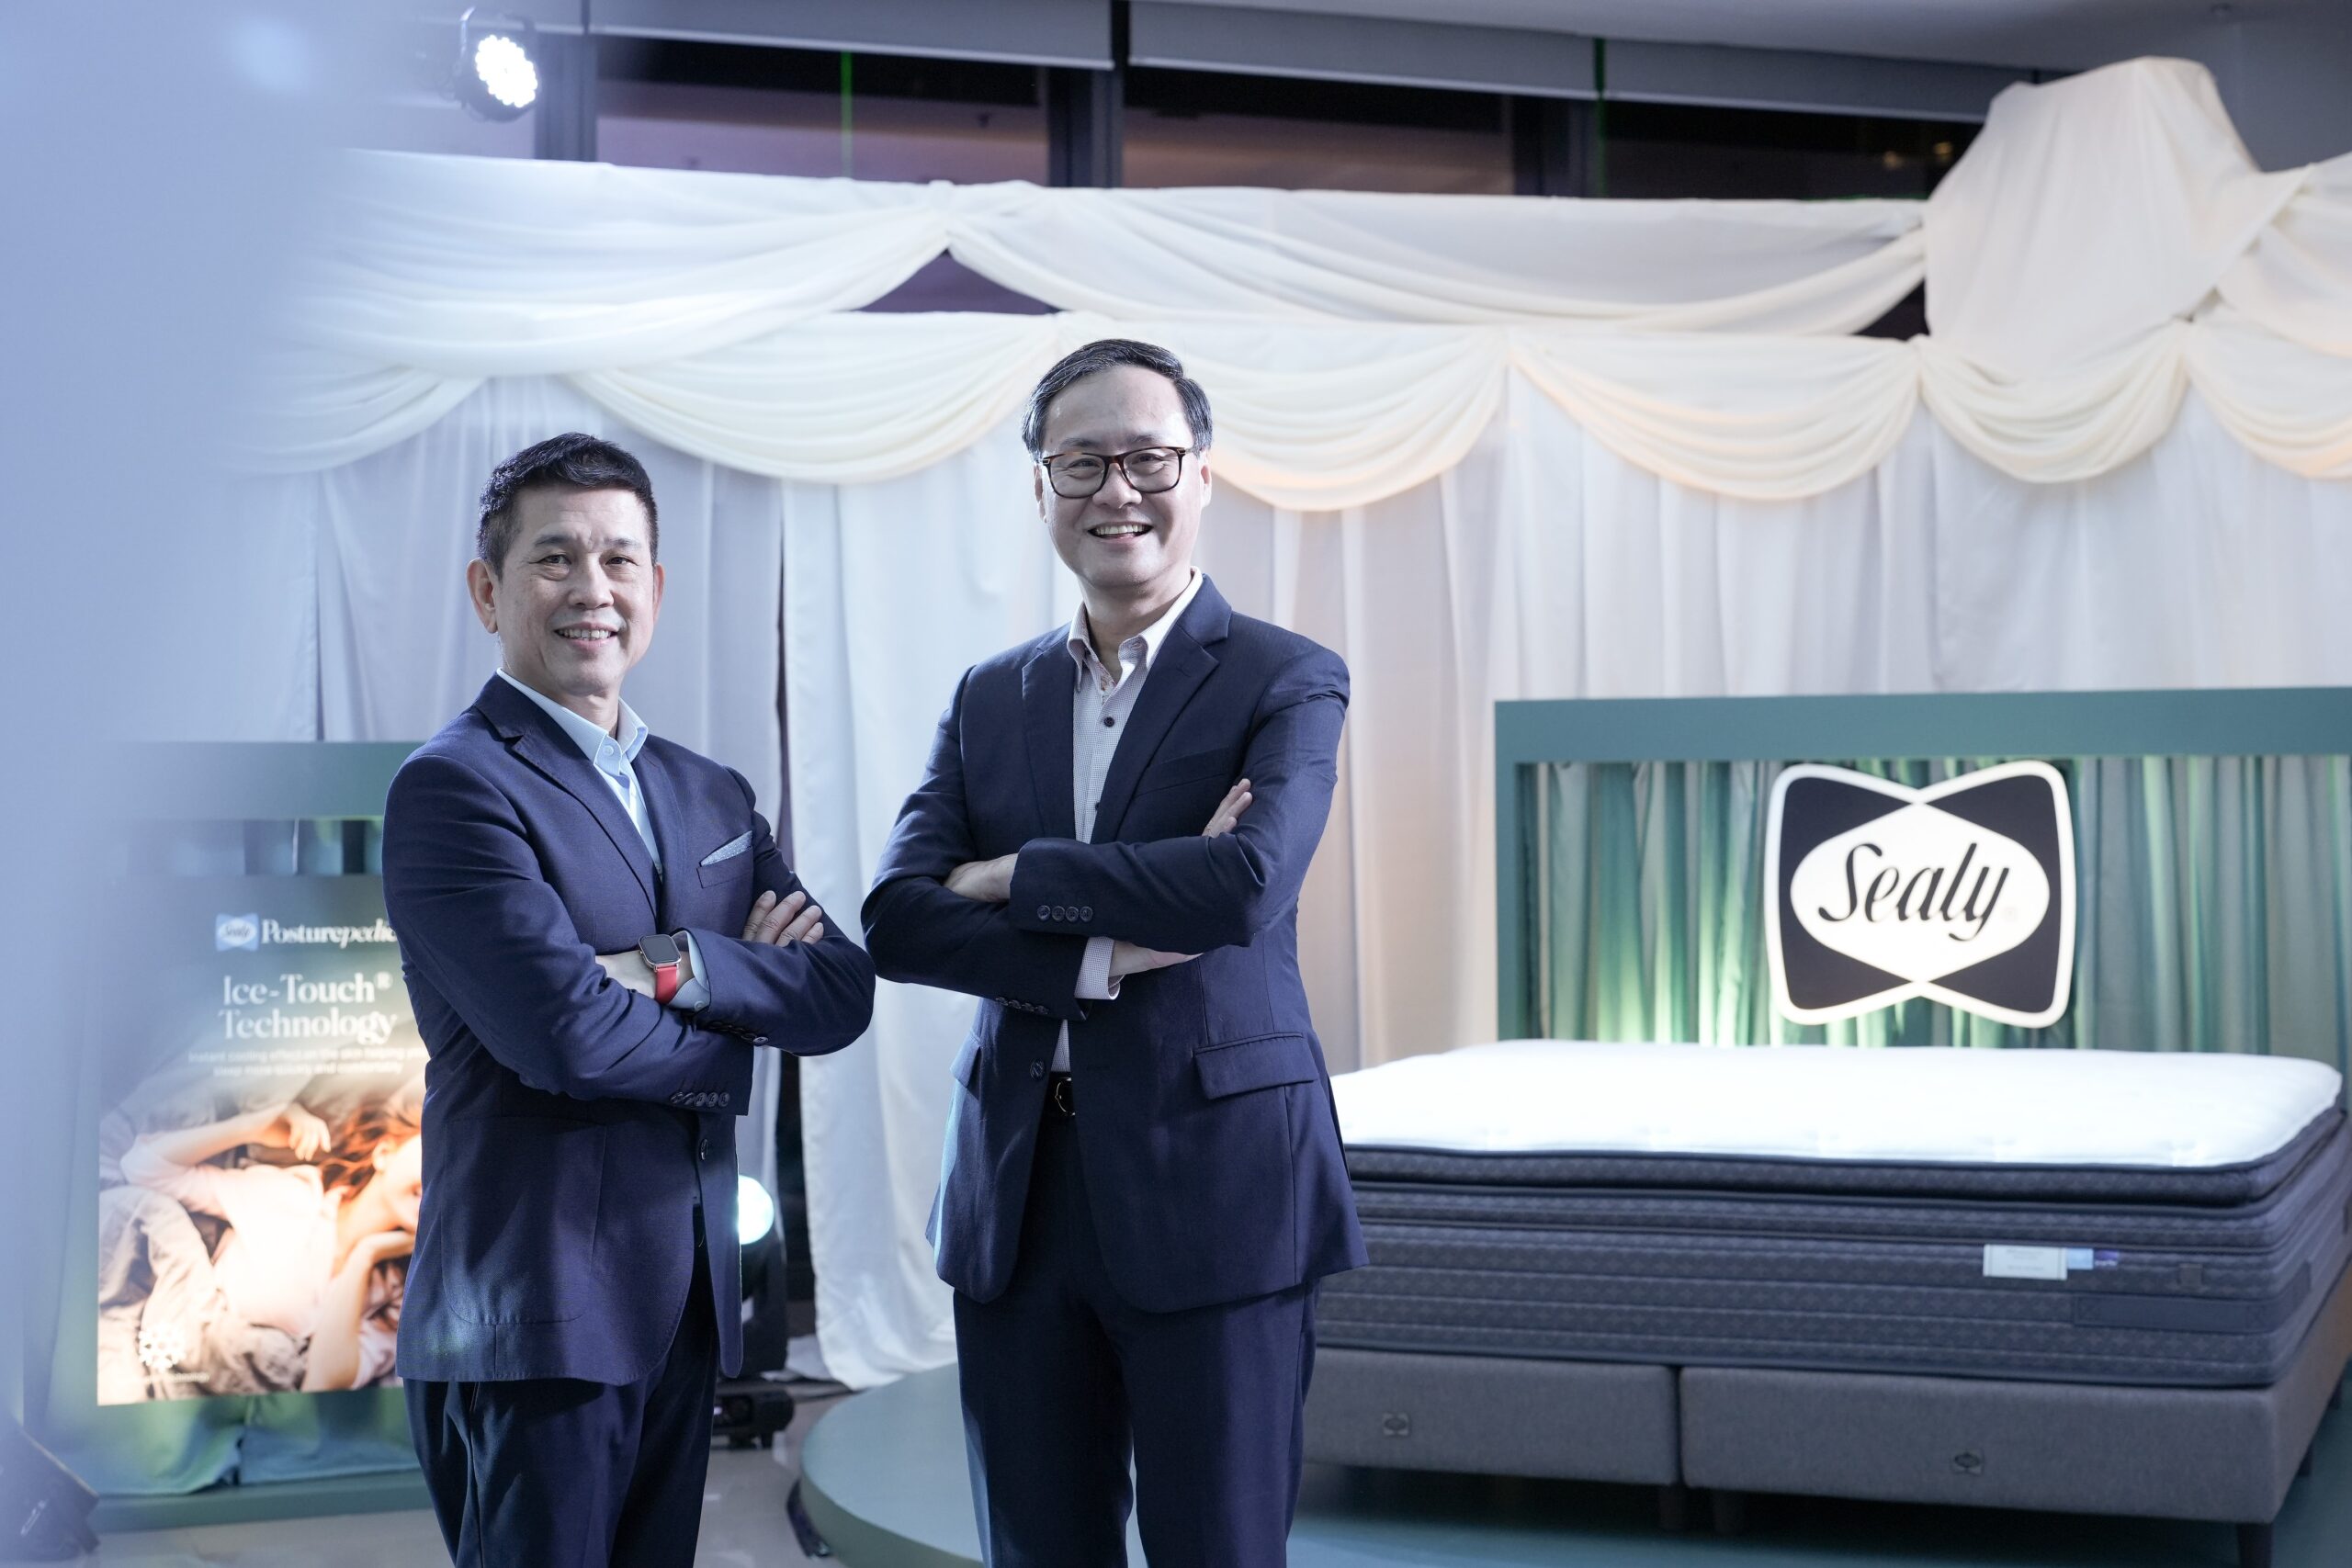 From left to right: Dennis Tan Head of Regional Sales & Hospitality of Sealy Asia (SG) Pte Ltd, Chee Yan Lee, Director and General Manager of Sealy Asia